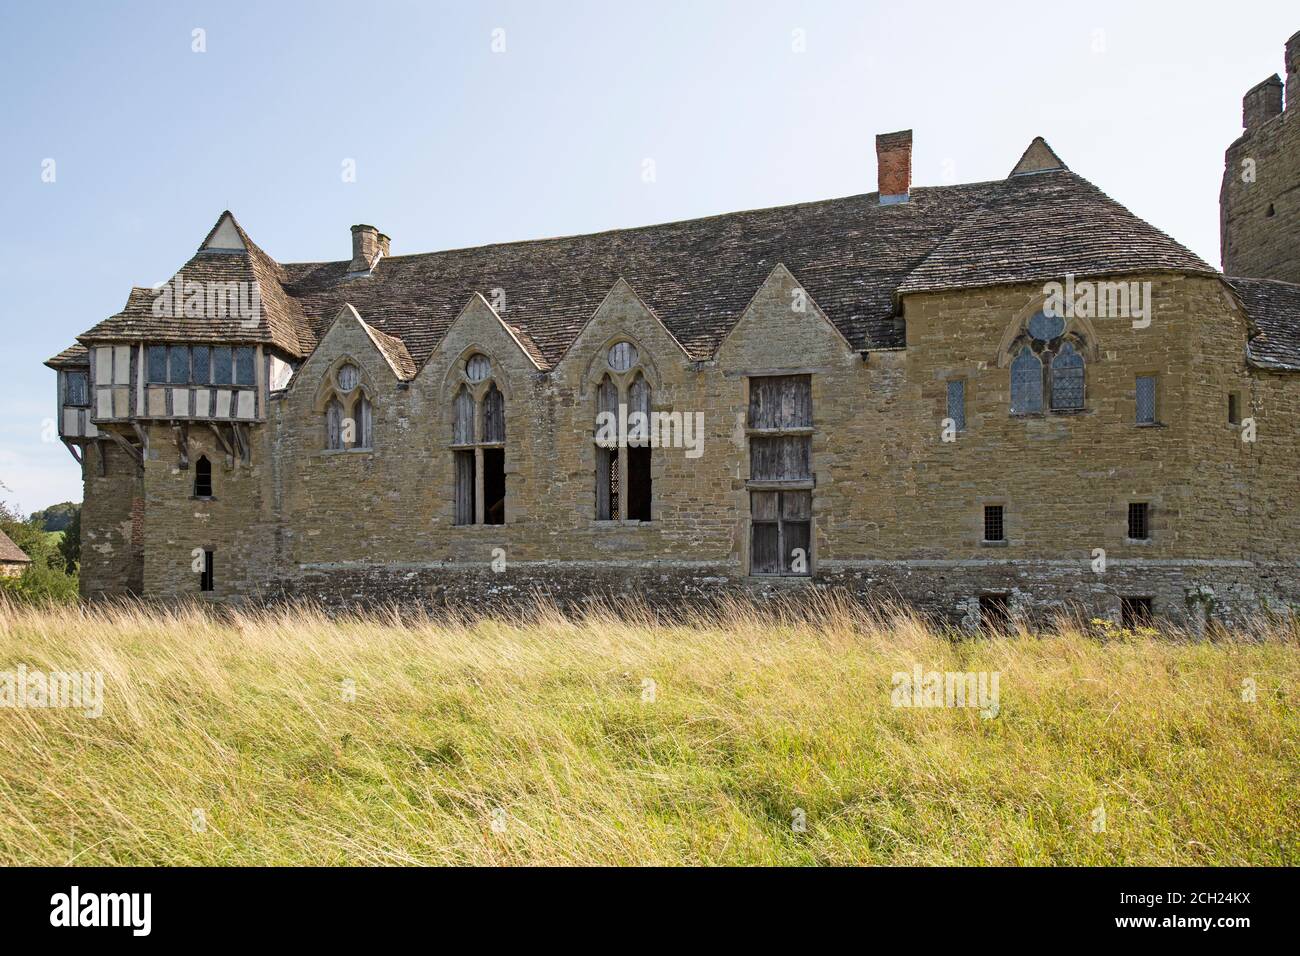 Stokesay Castle, a 13th Century fortified manor House in the English County of Shropshire. Stock Photo